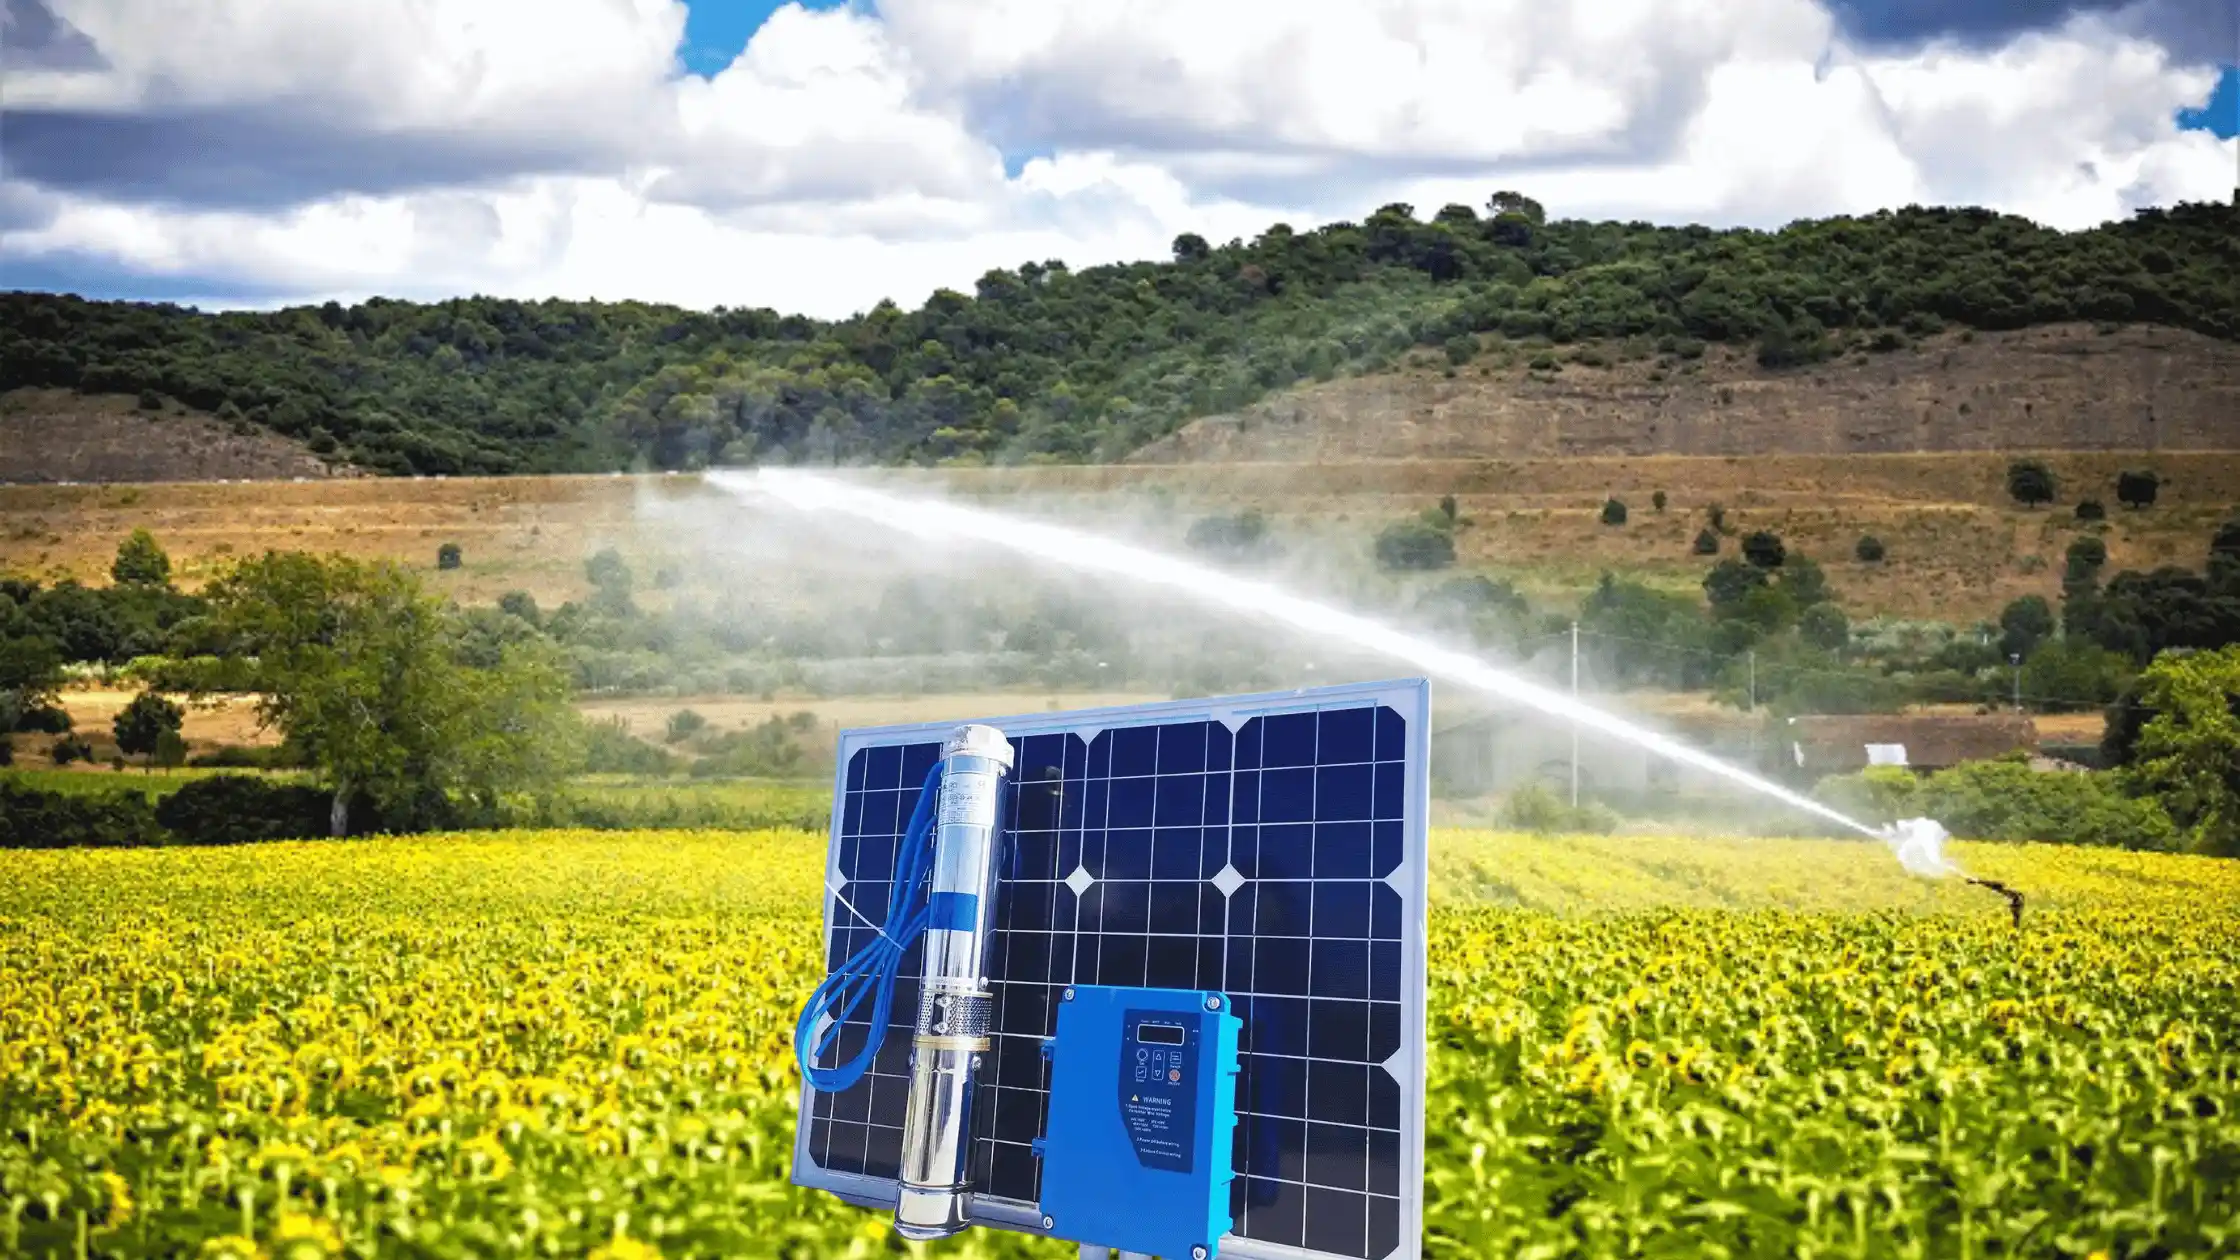 Solar water pumps for irrigation